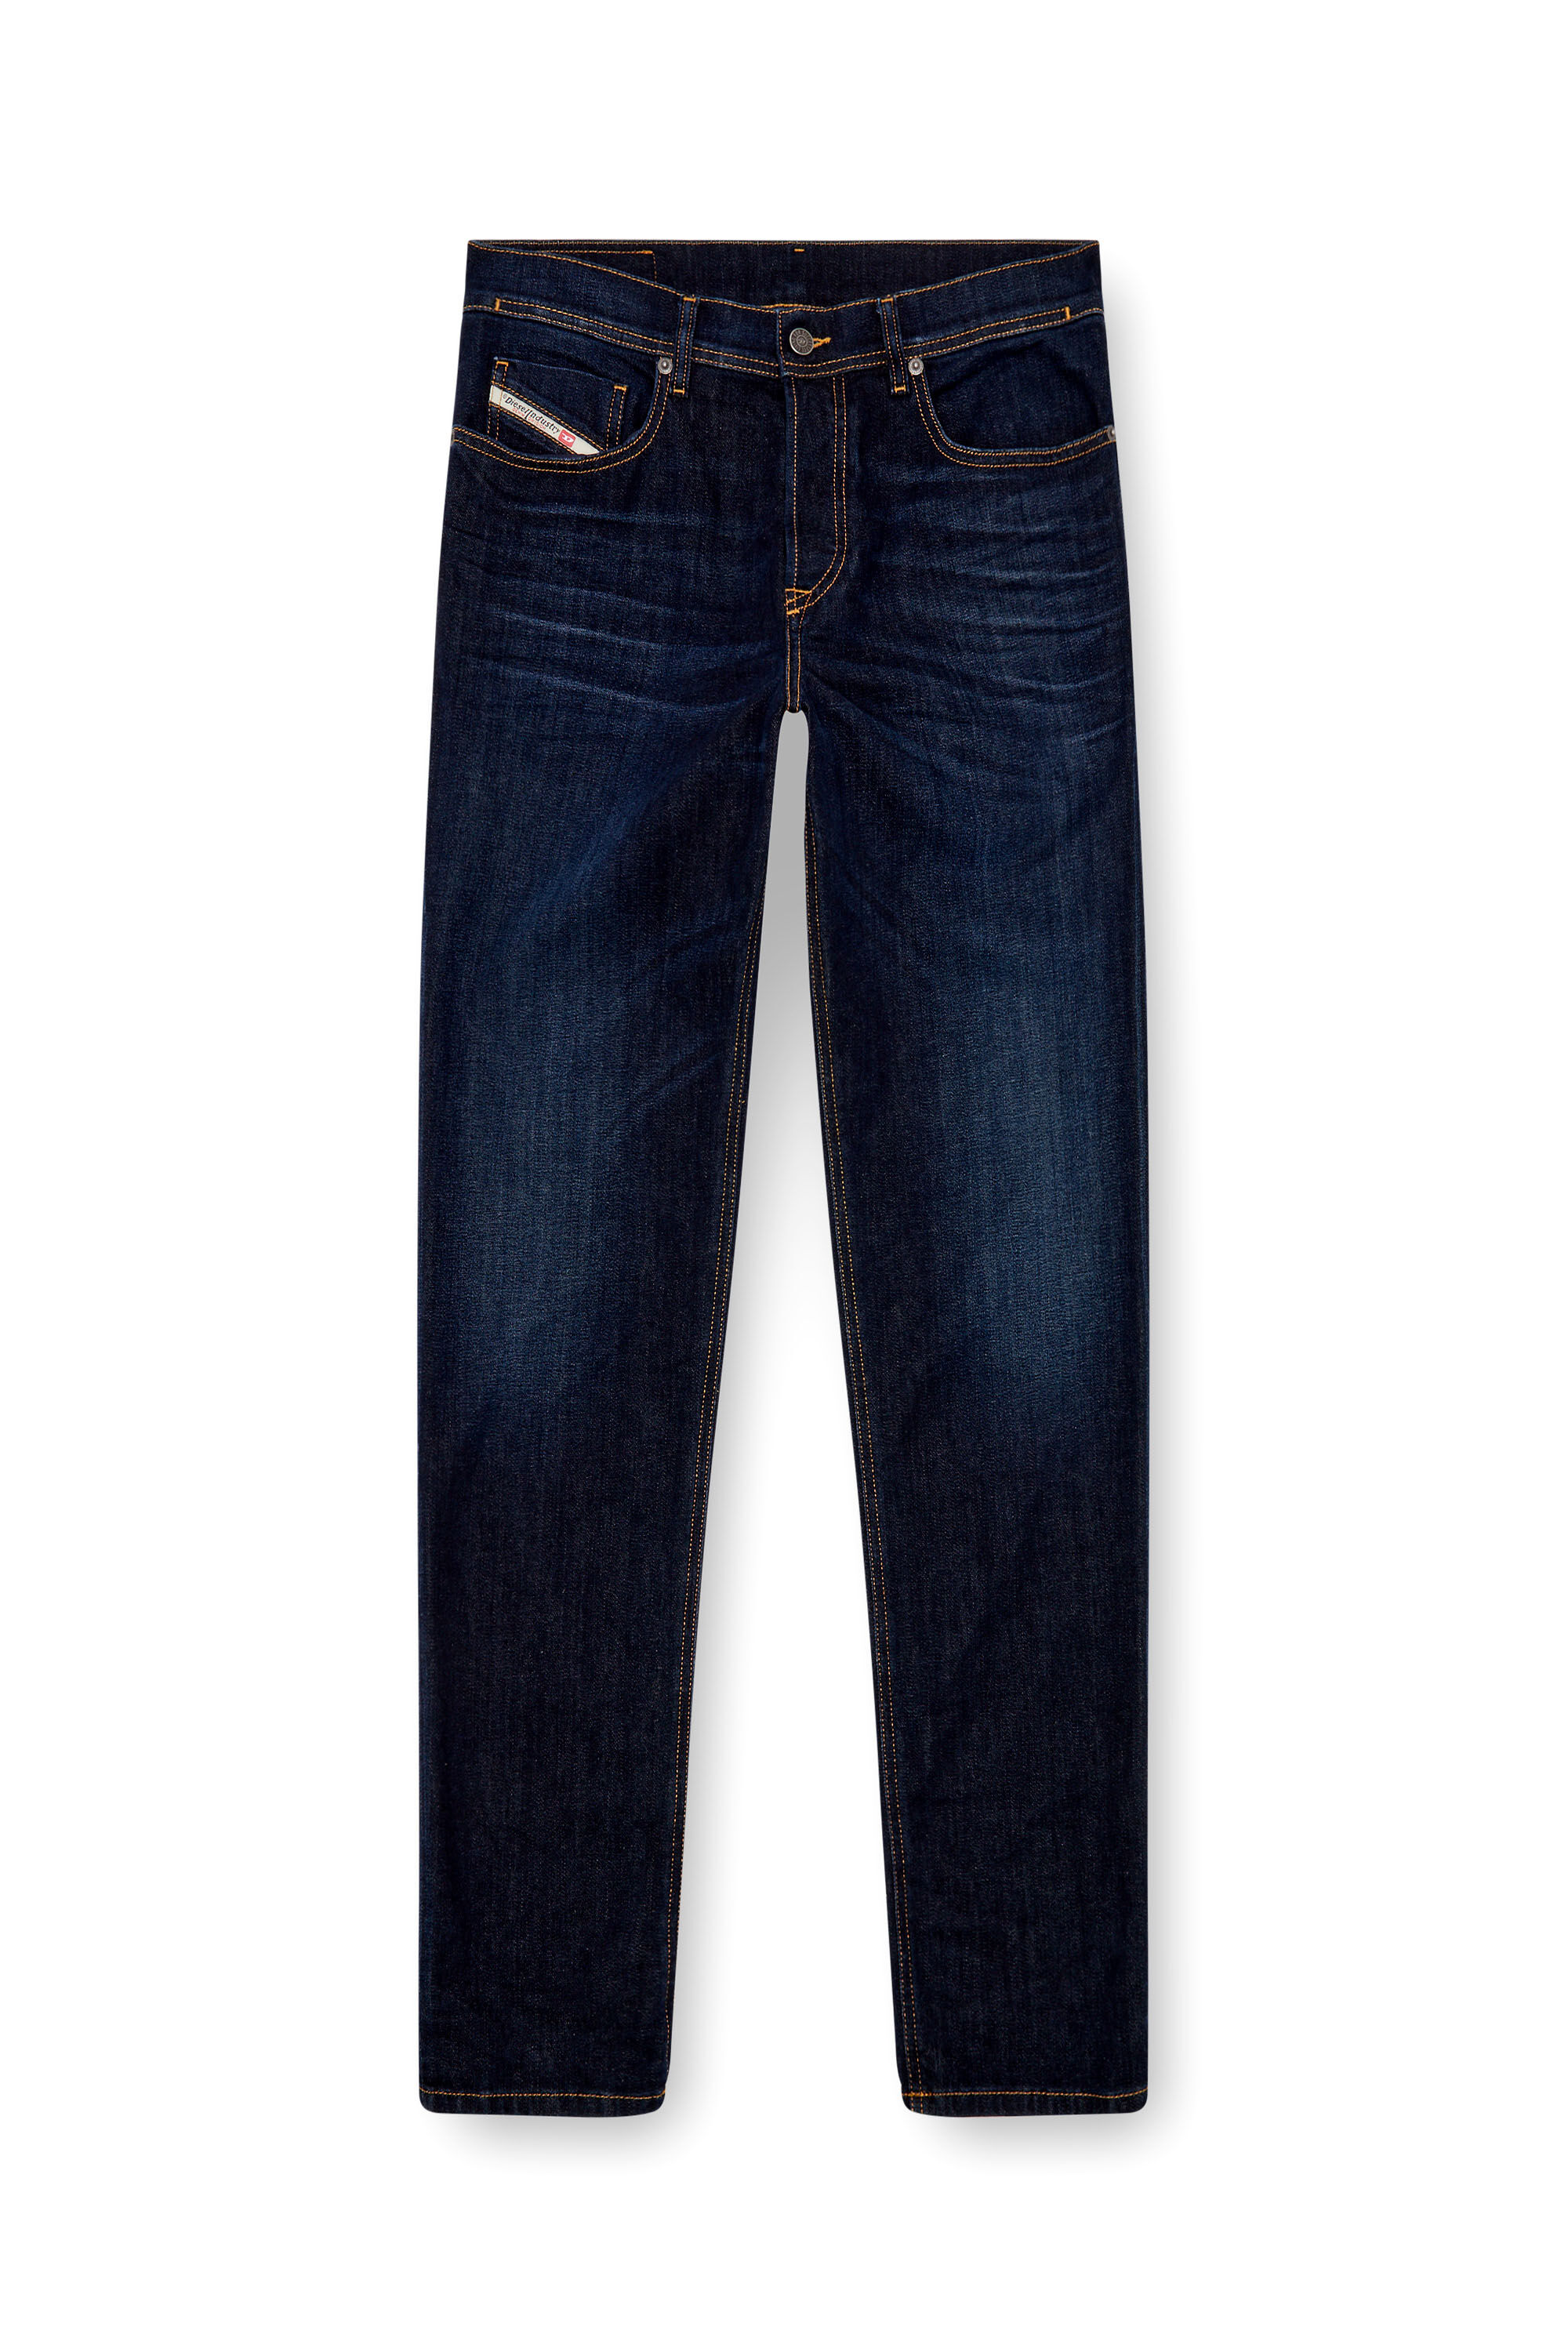 Diesel - Tapered Jeans 2023 D-Finitive 009ZS, Hombre Tapered Jeans - 2023 D-Finitive in Azul marino - Image 2